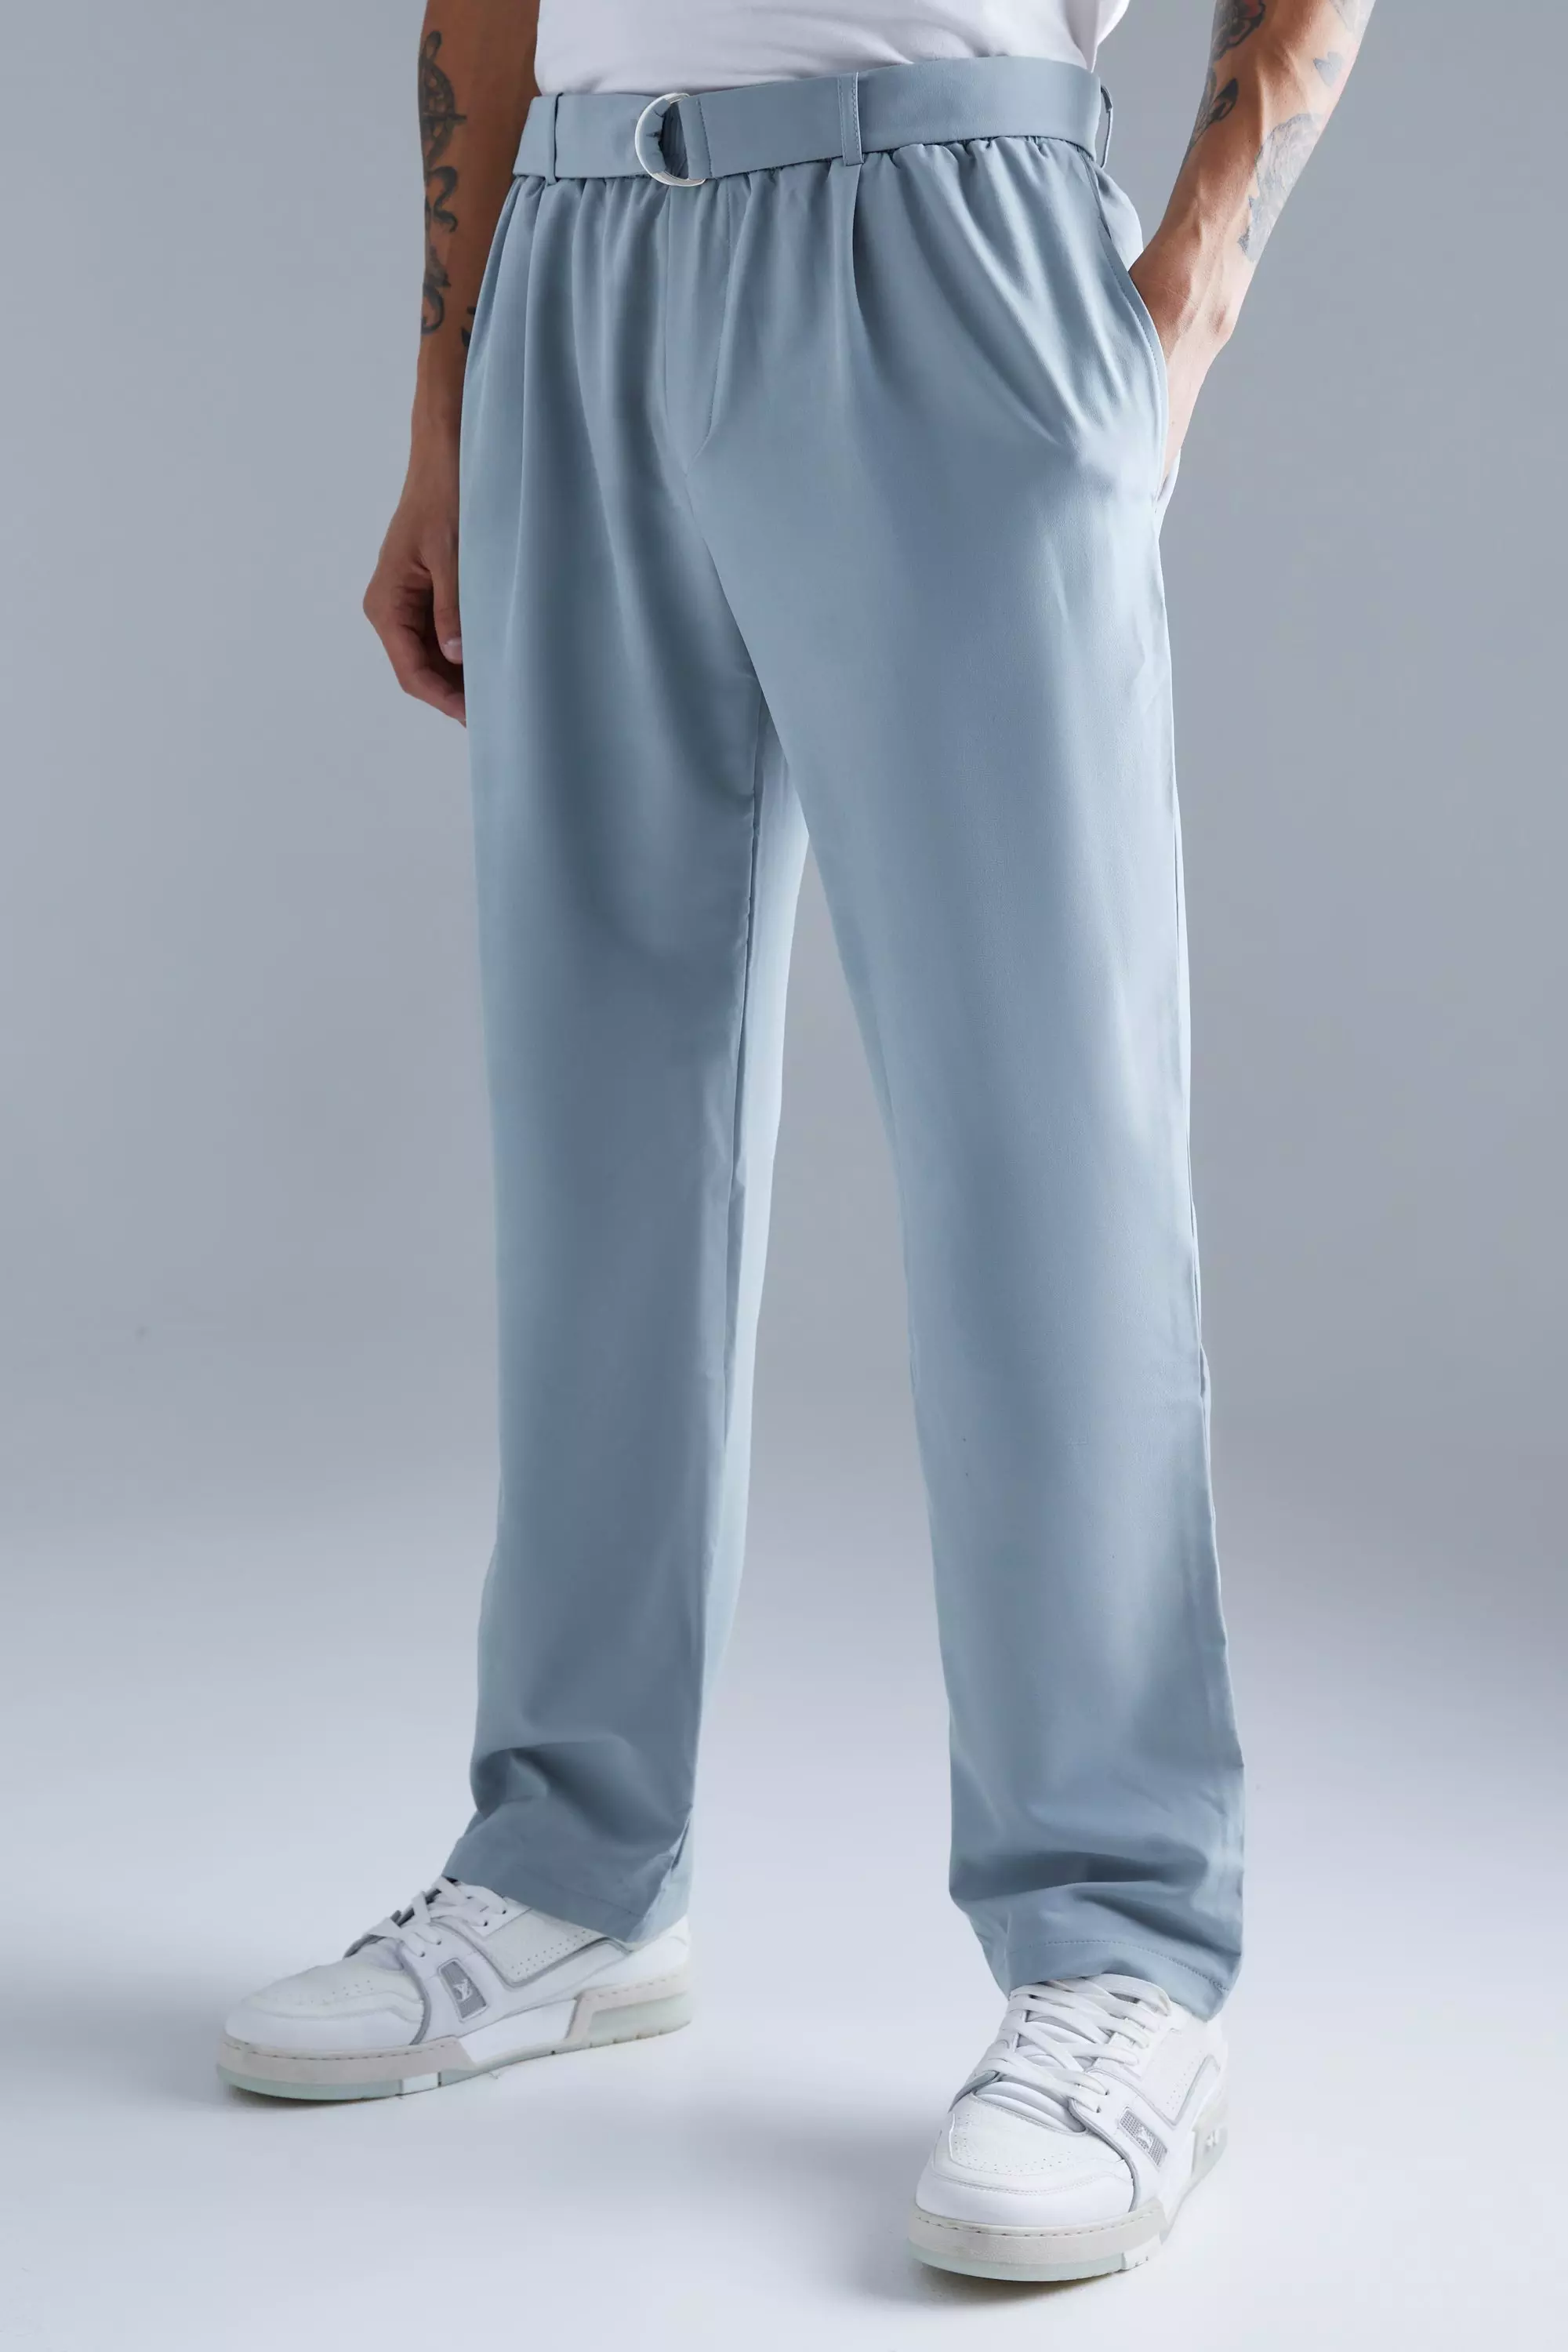 Elasticated Straight Belted 4 Way Stretch Pants Light grey